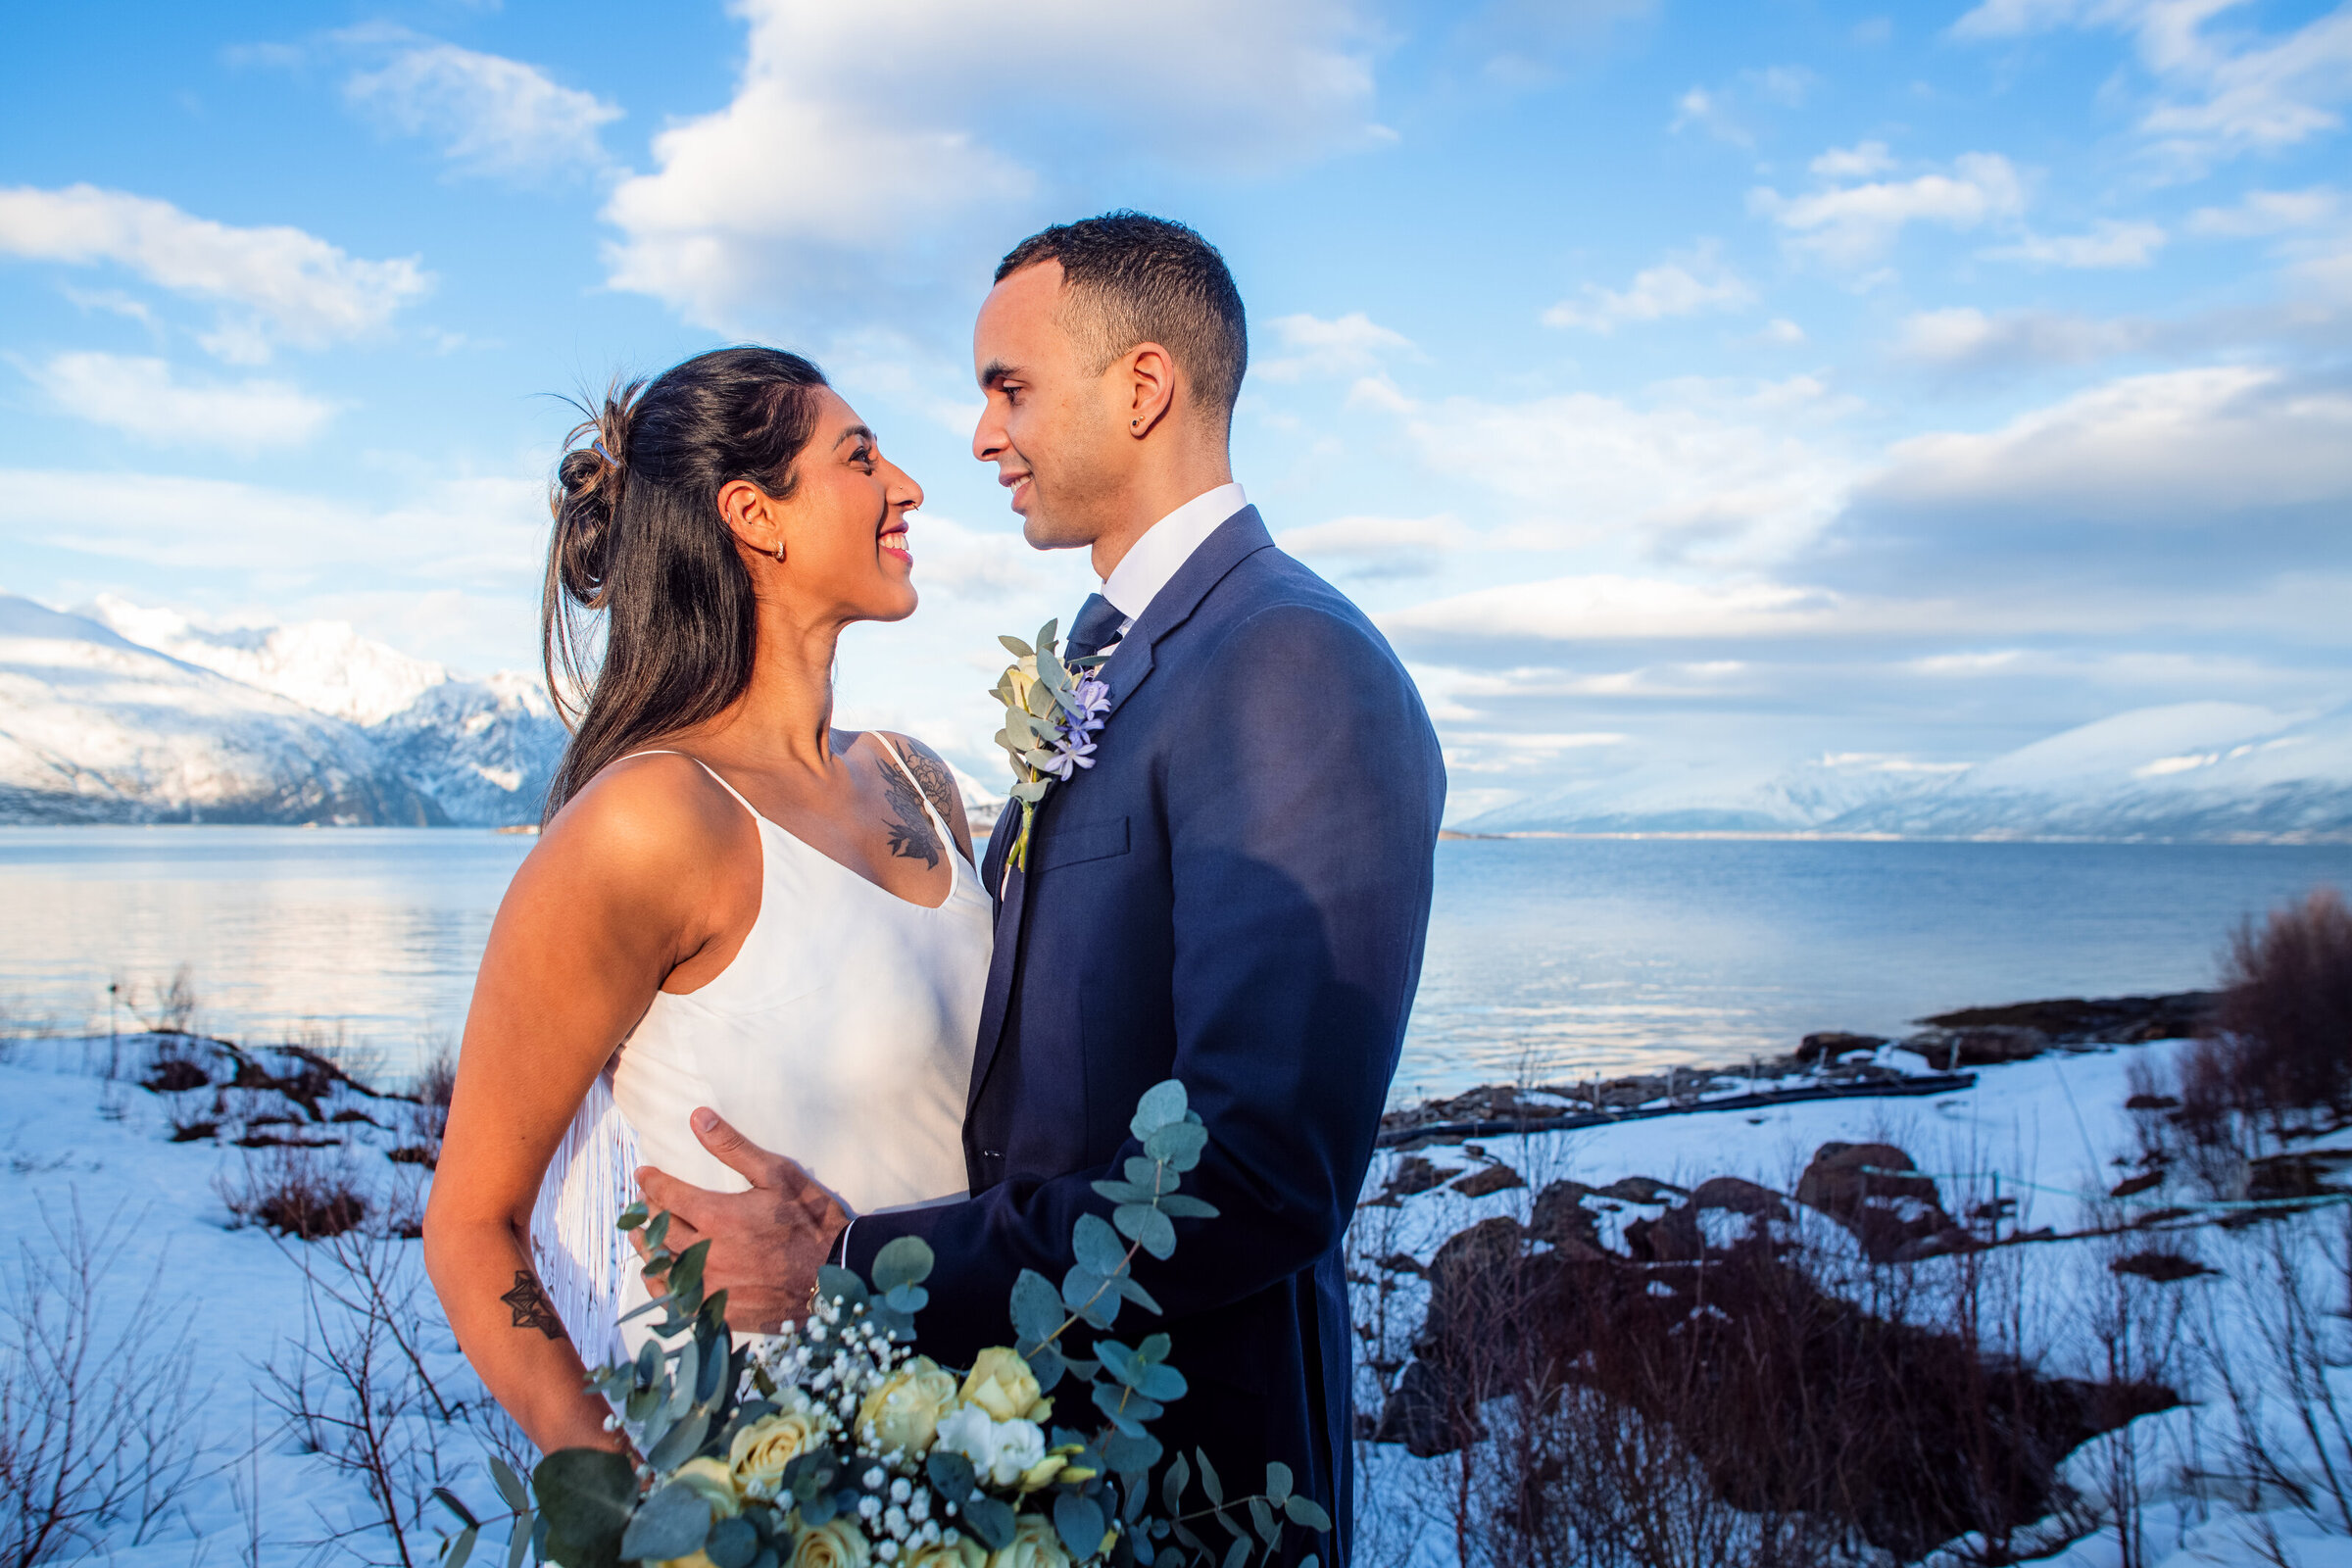 An Indian couple in western styled wedding attire lovingly gazing at each other with a serene Lyngen fjord and snowy mountains in the background, highlighting the beauty of the Tromsø area captured by their elopement photographer.